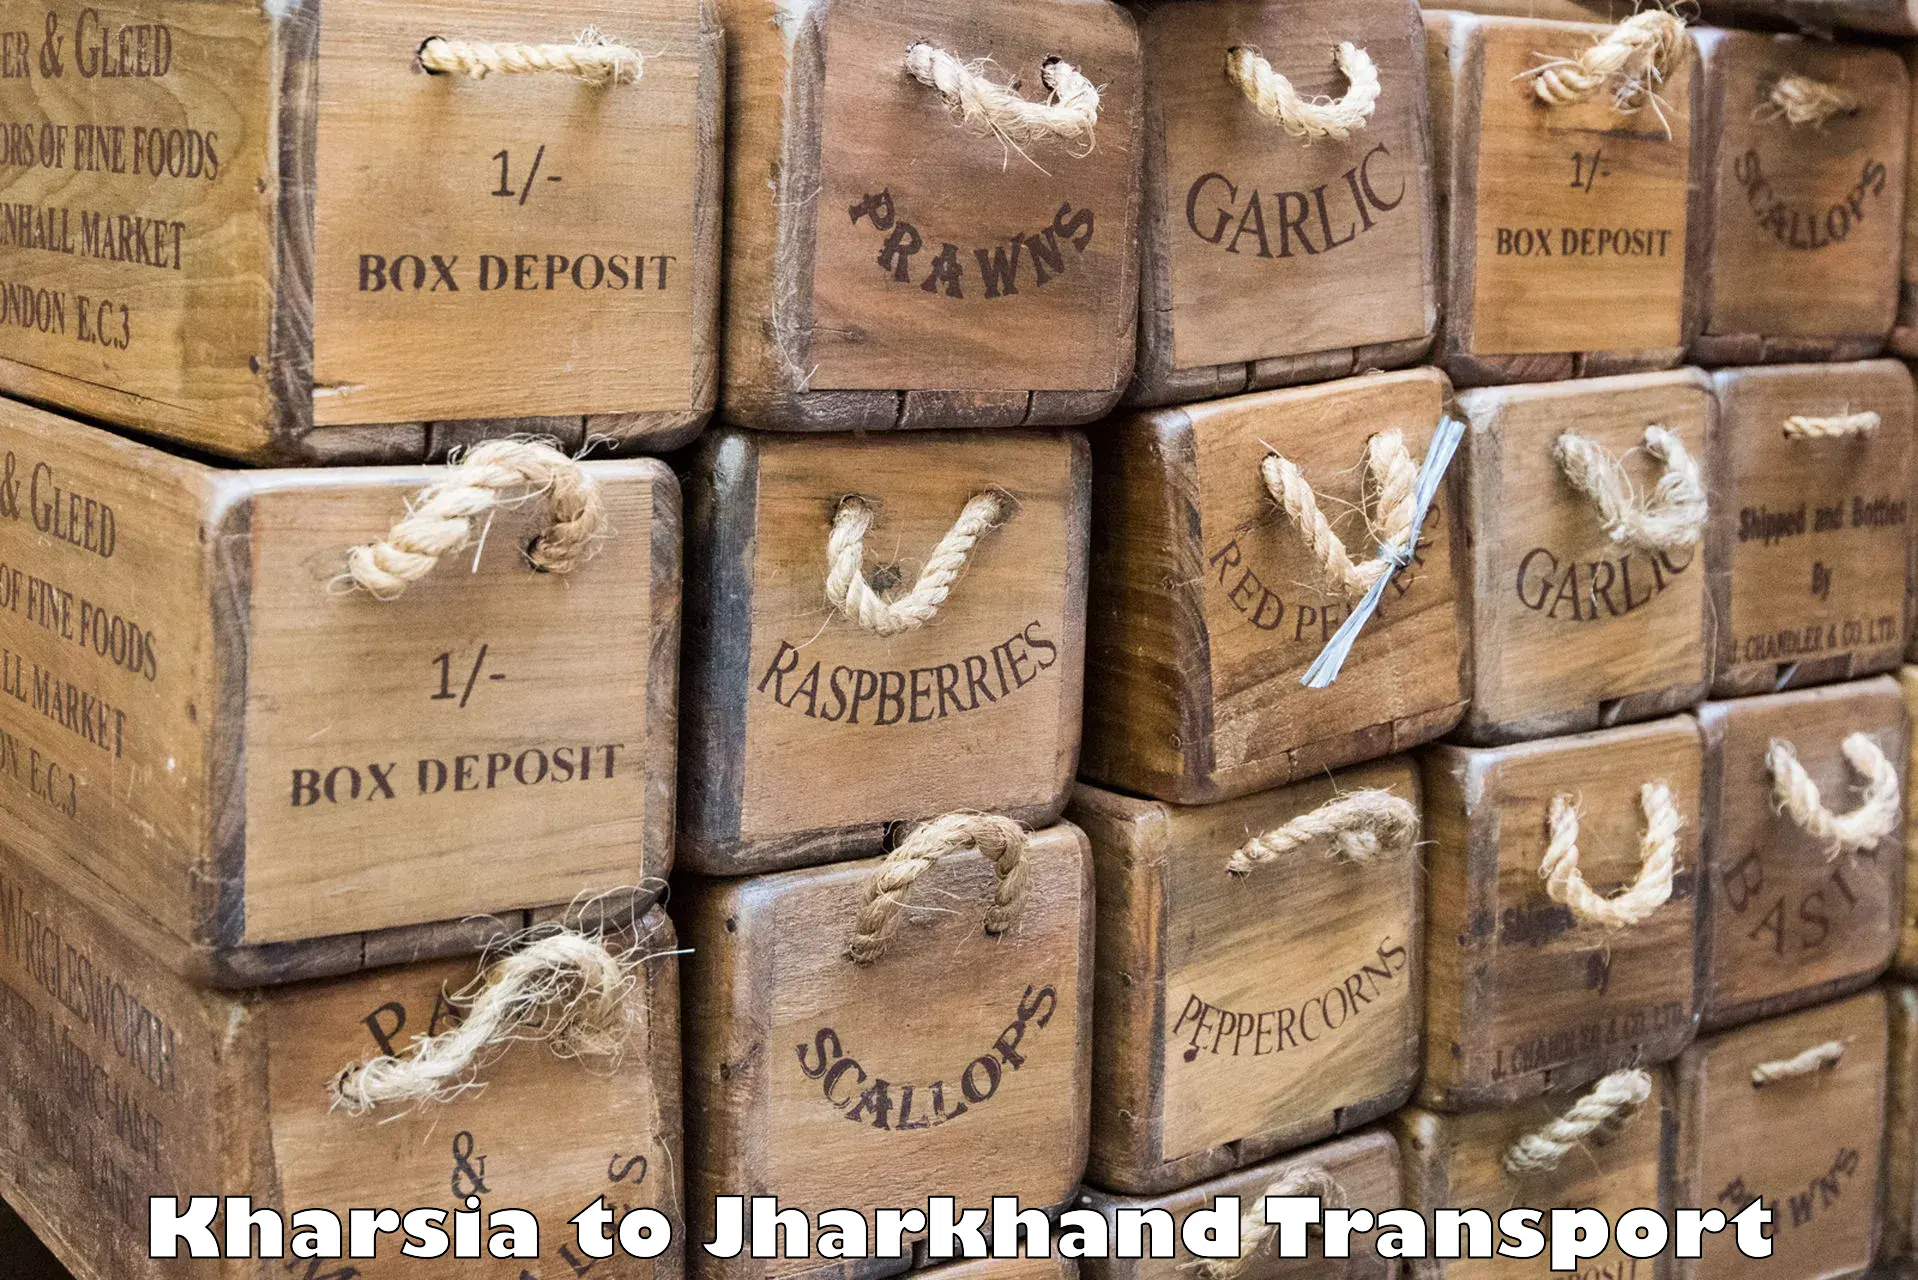 Air cargo transport services Kharsia to IIT Dhanbad